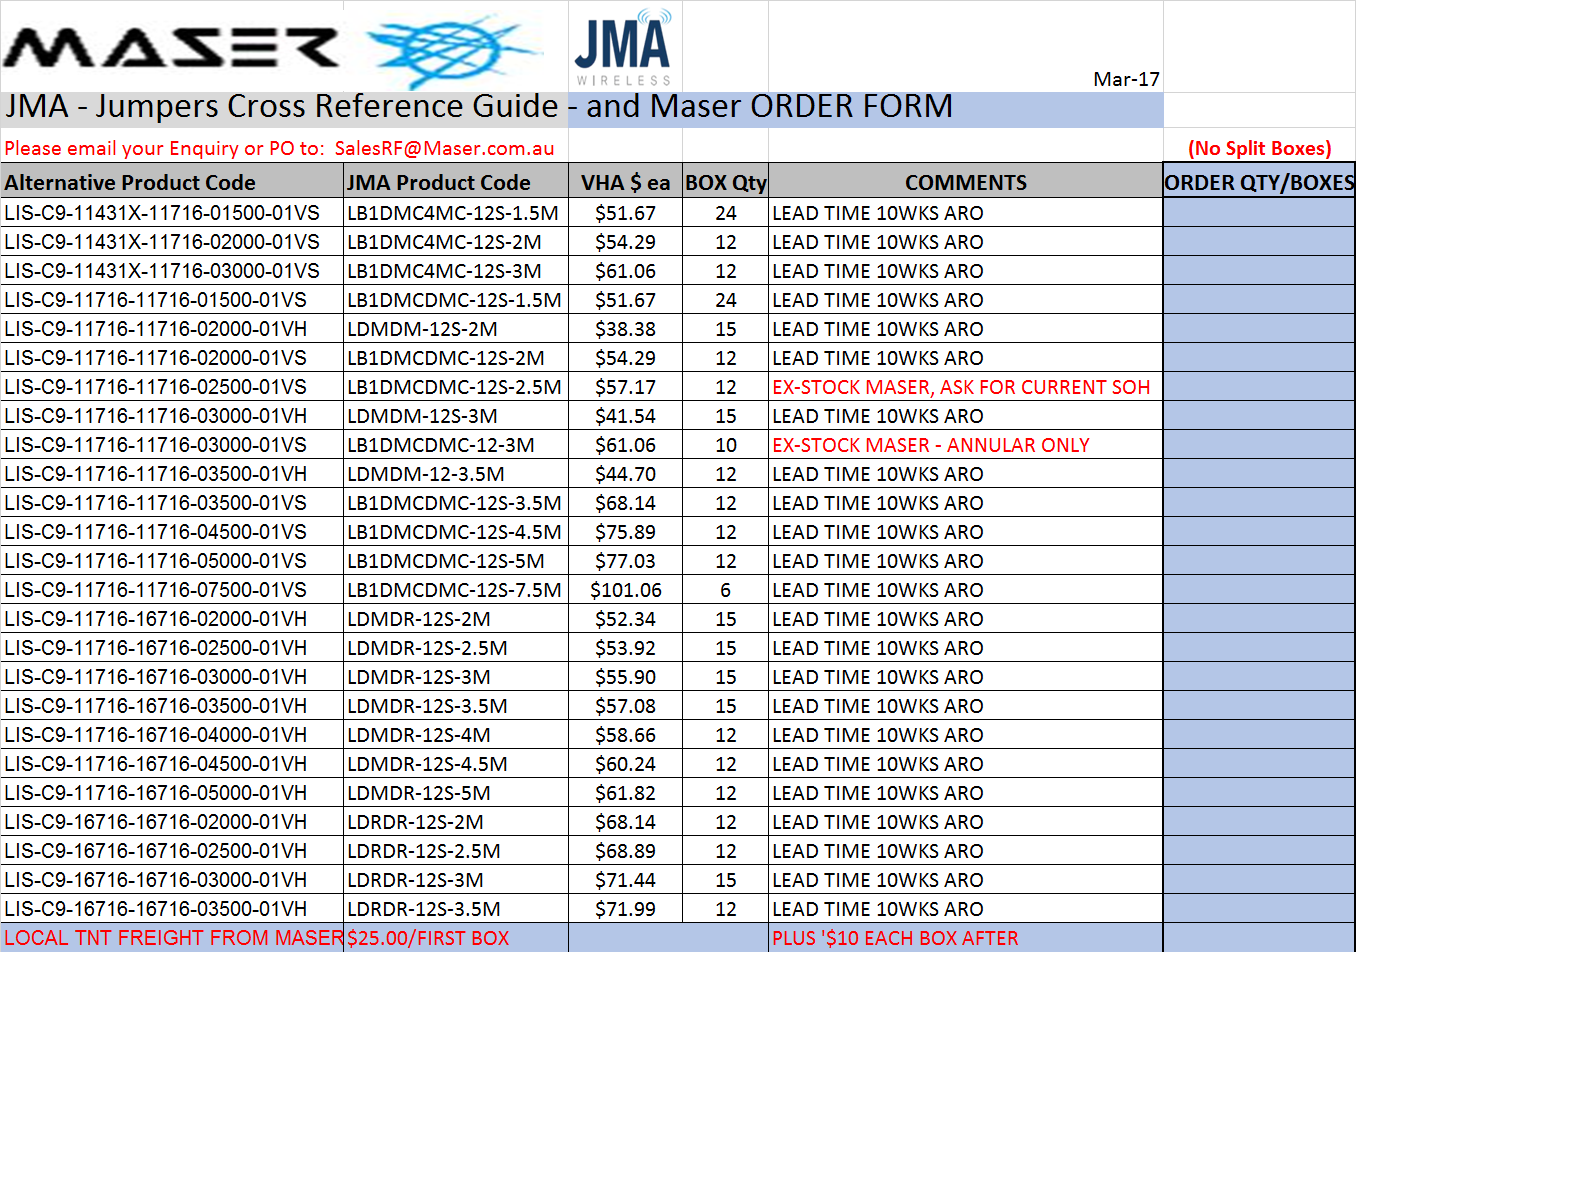 Order your JMA Jumpers from Maser today!